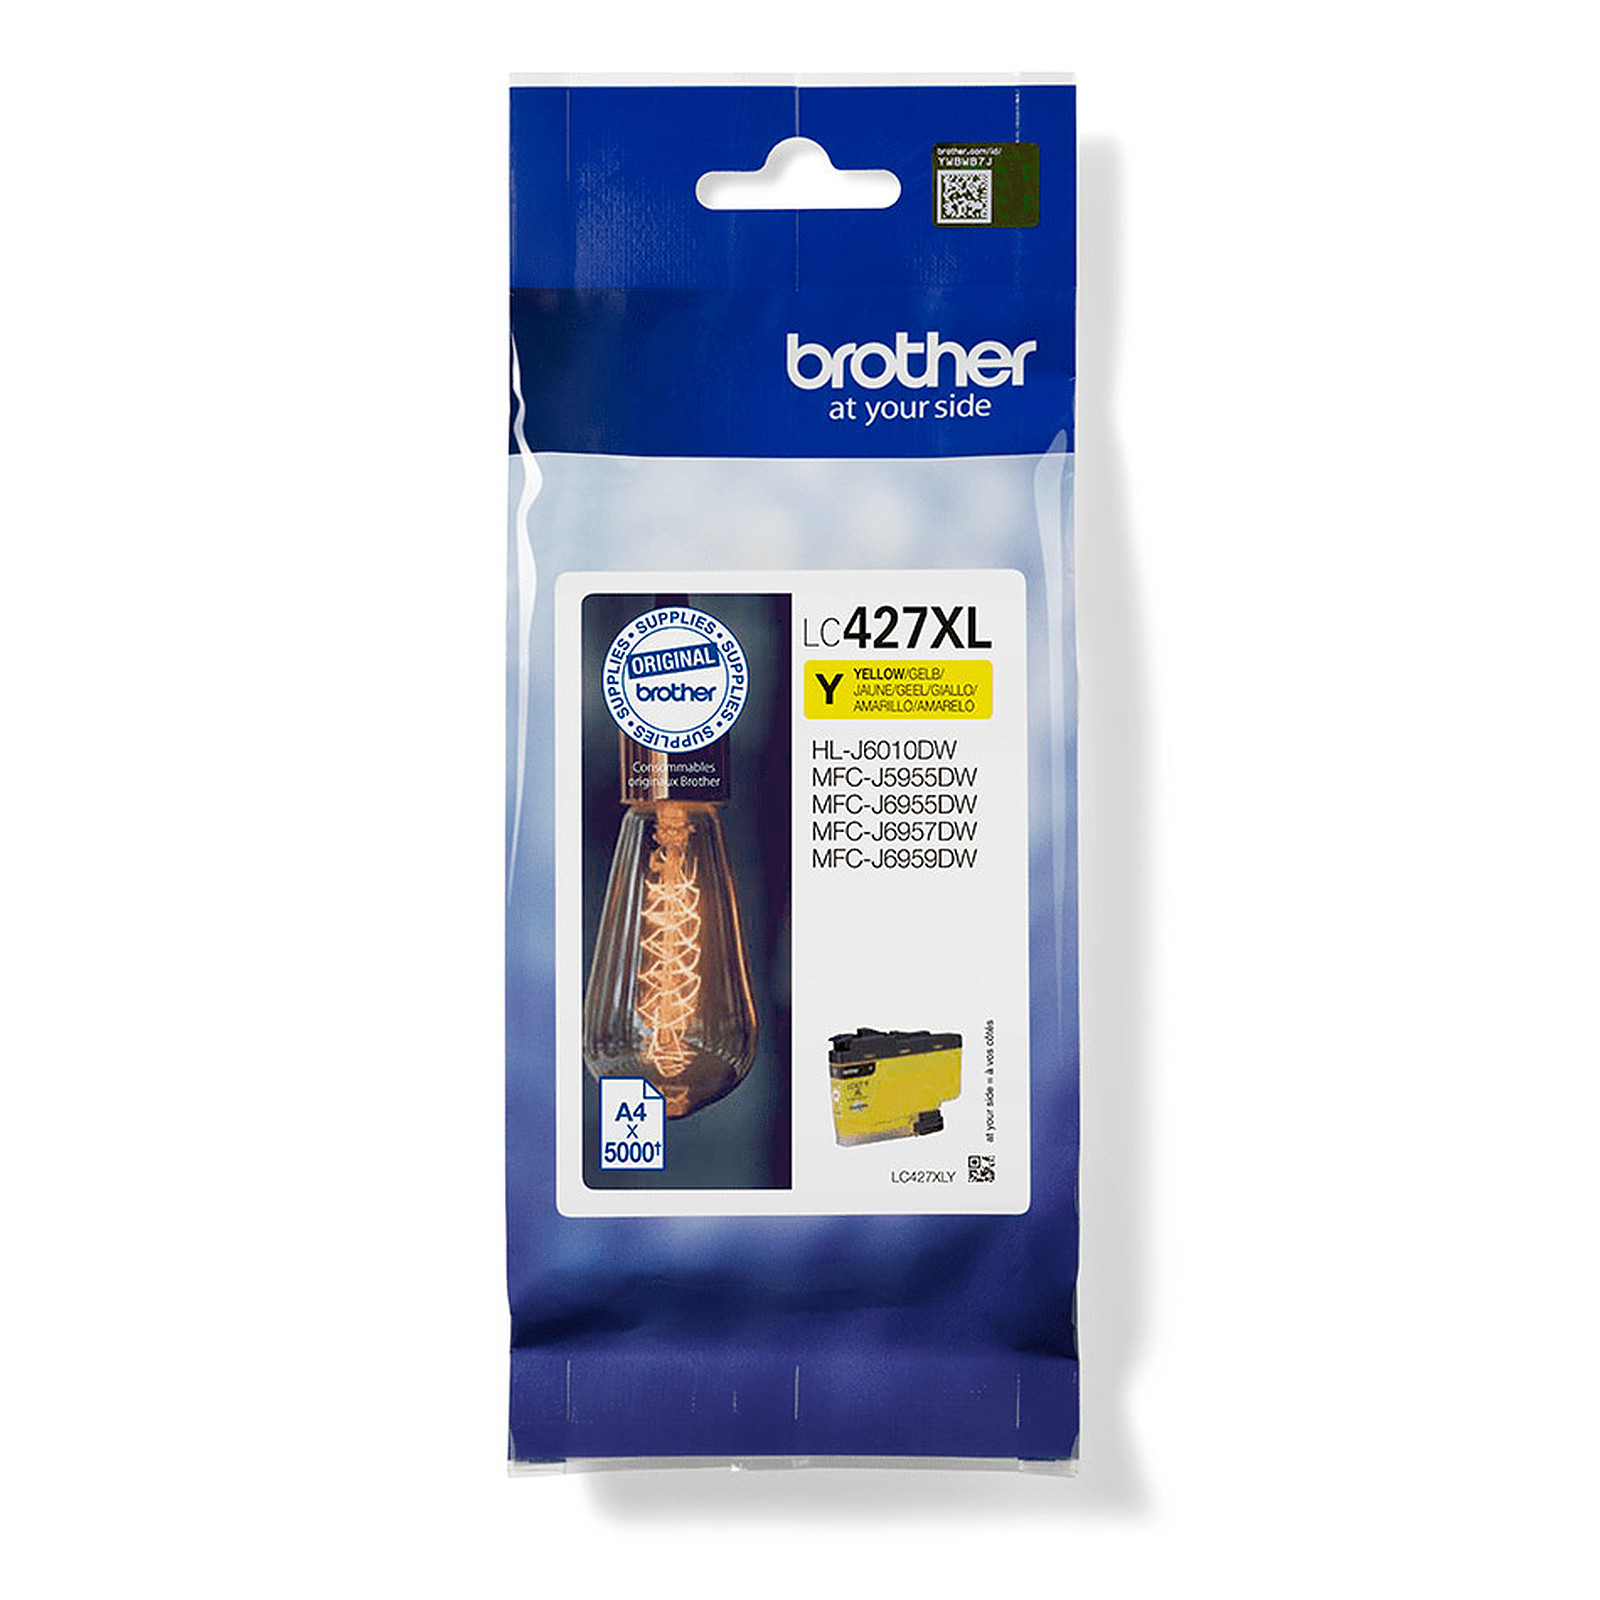 Brother LC427XL Jaune - Cartouche imprimante Brother